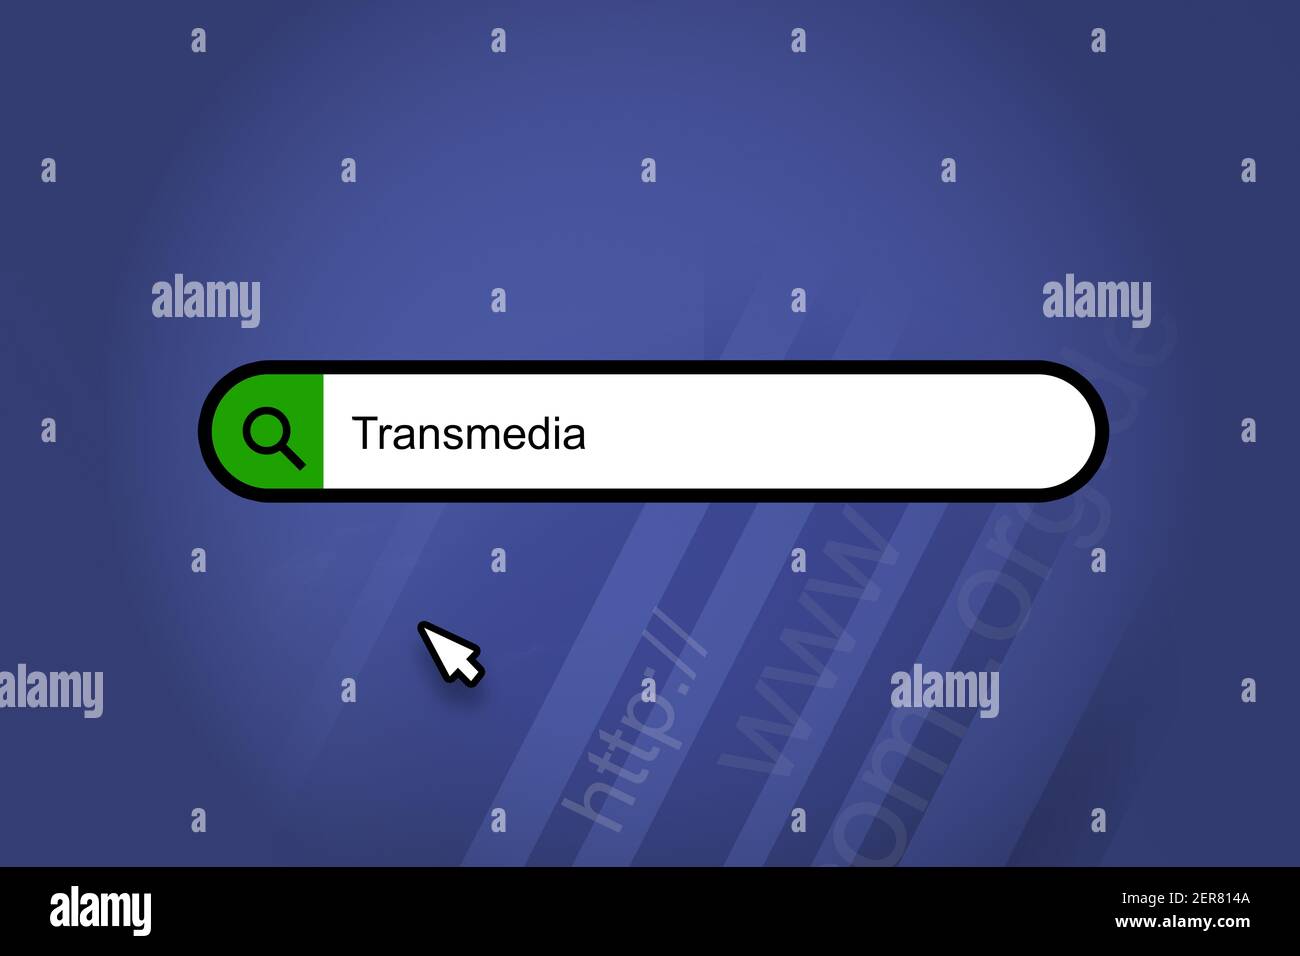 Transmedia - search engine, search bar with blue background Stock Photo